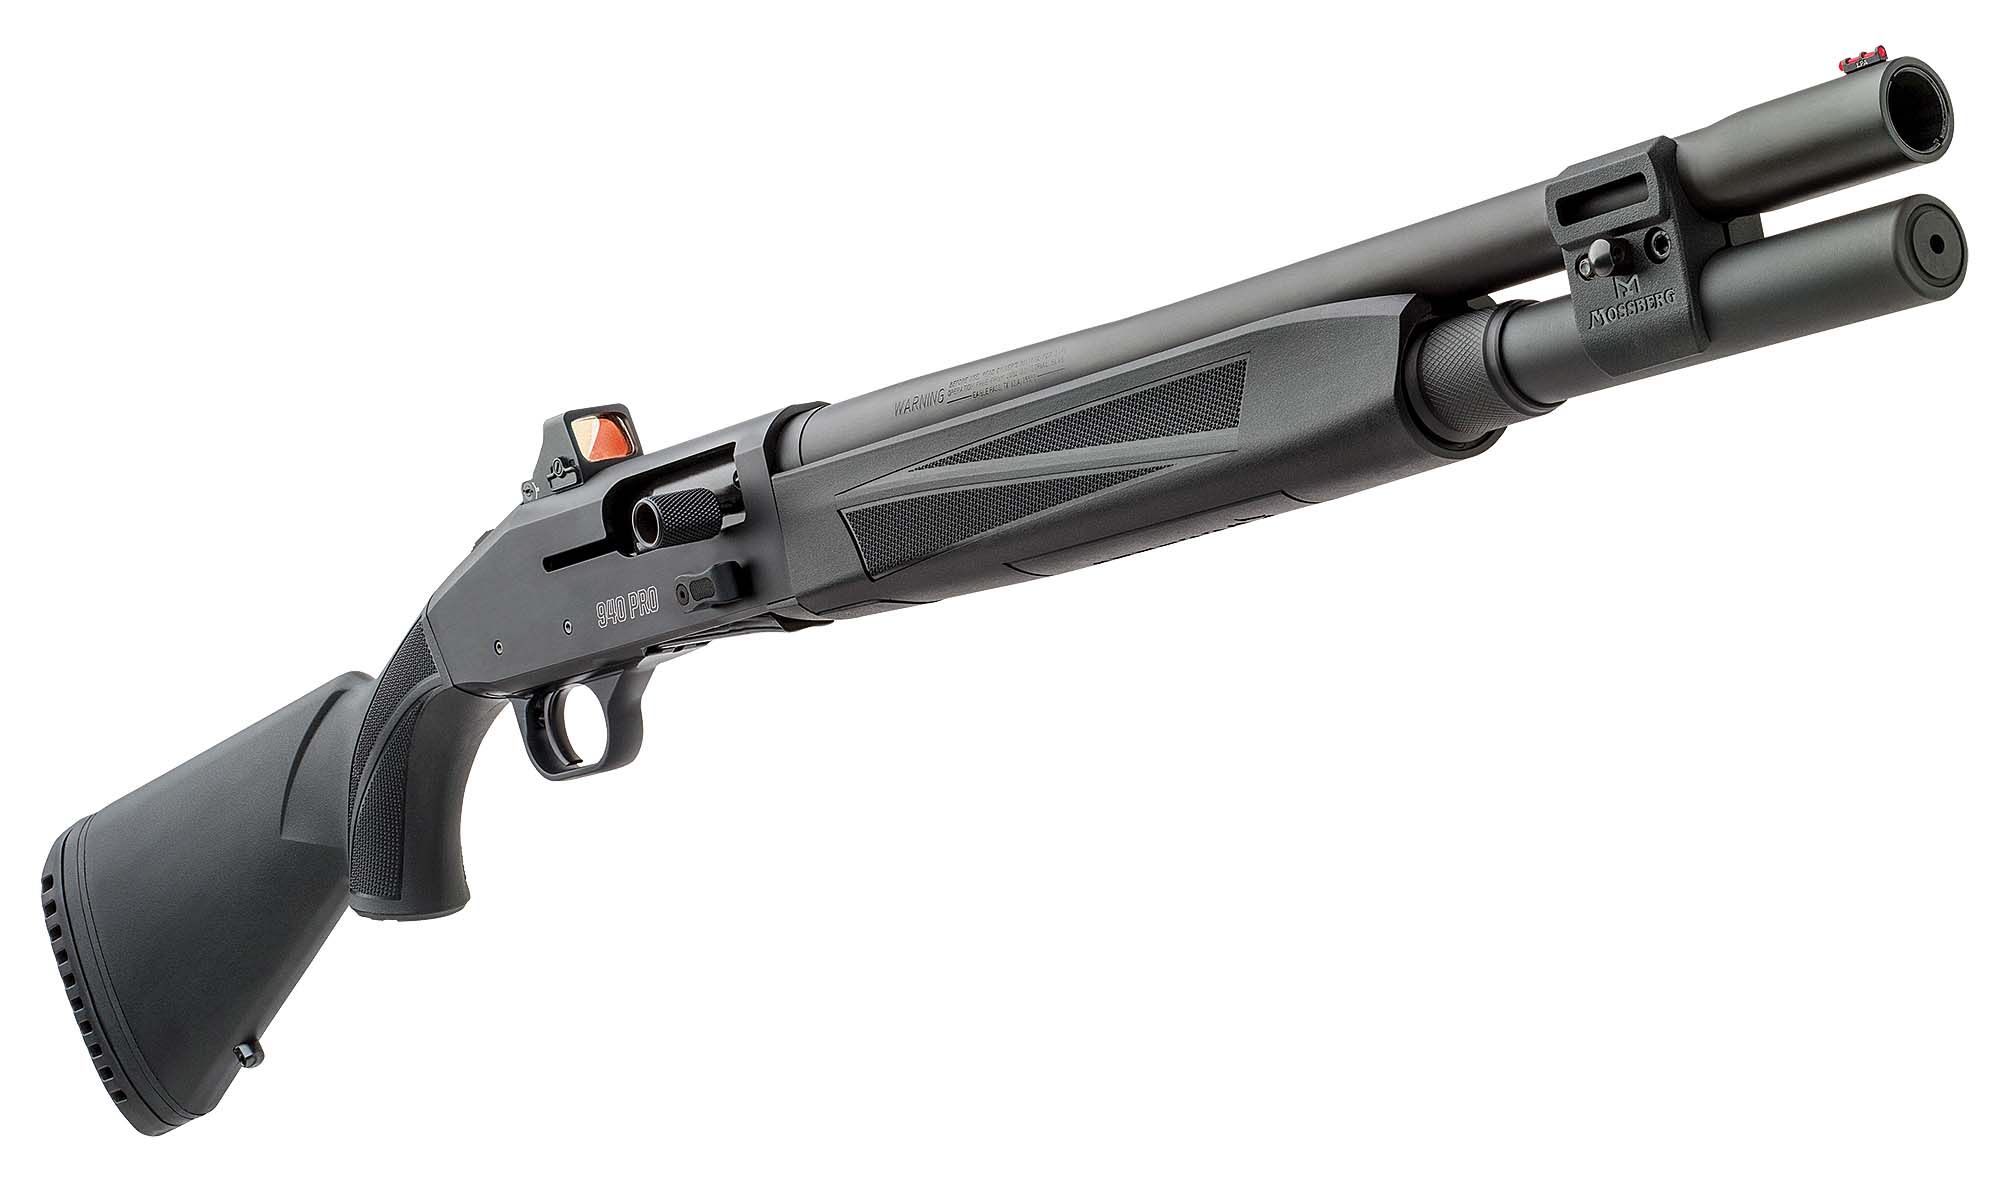 Mossberg 940 Pro Tactical Review: A Personal-Defense Firearm That’s a Capable Competition Shotgun